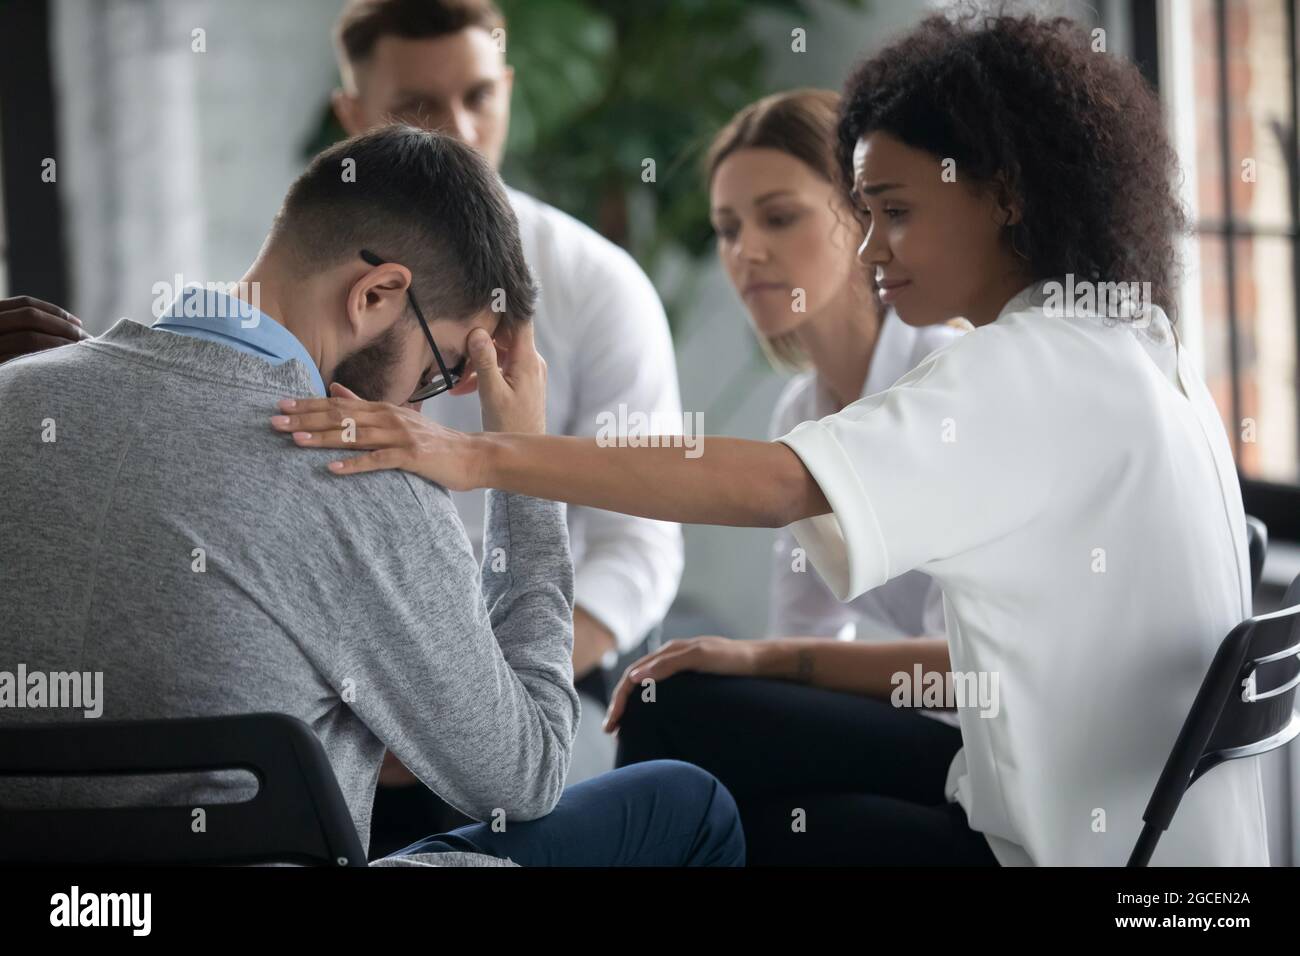 Caring ethnic woman support unhappy male at counseling Stock Photo